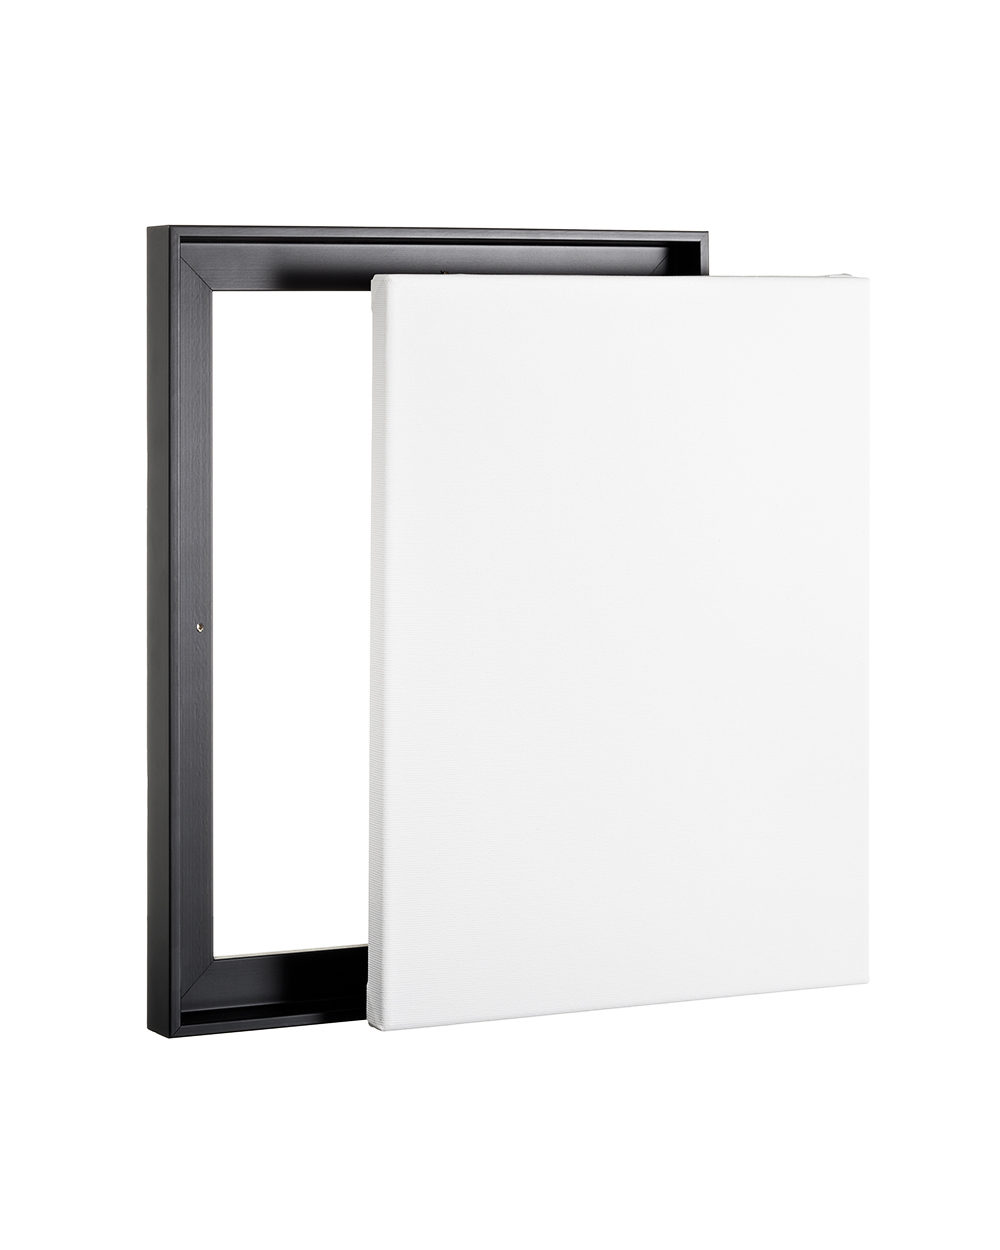 BASIC COTTON - Student Stretched Canvas Frame